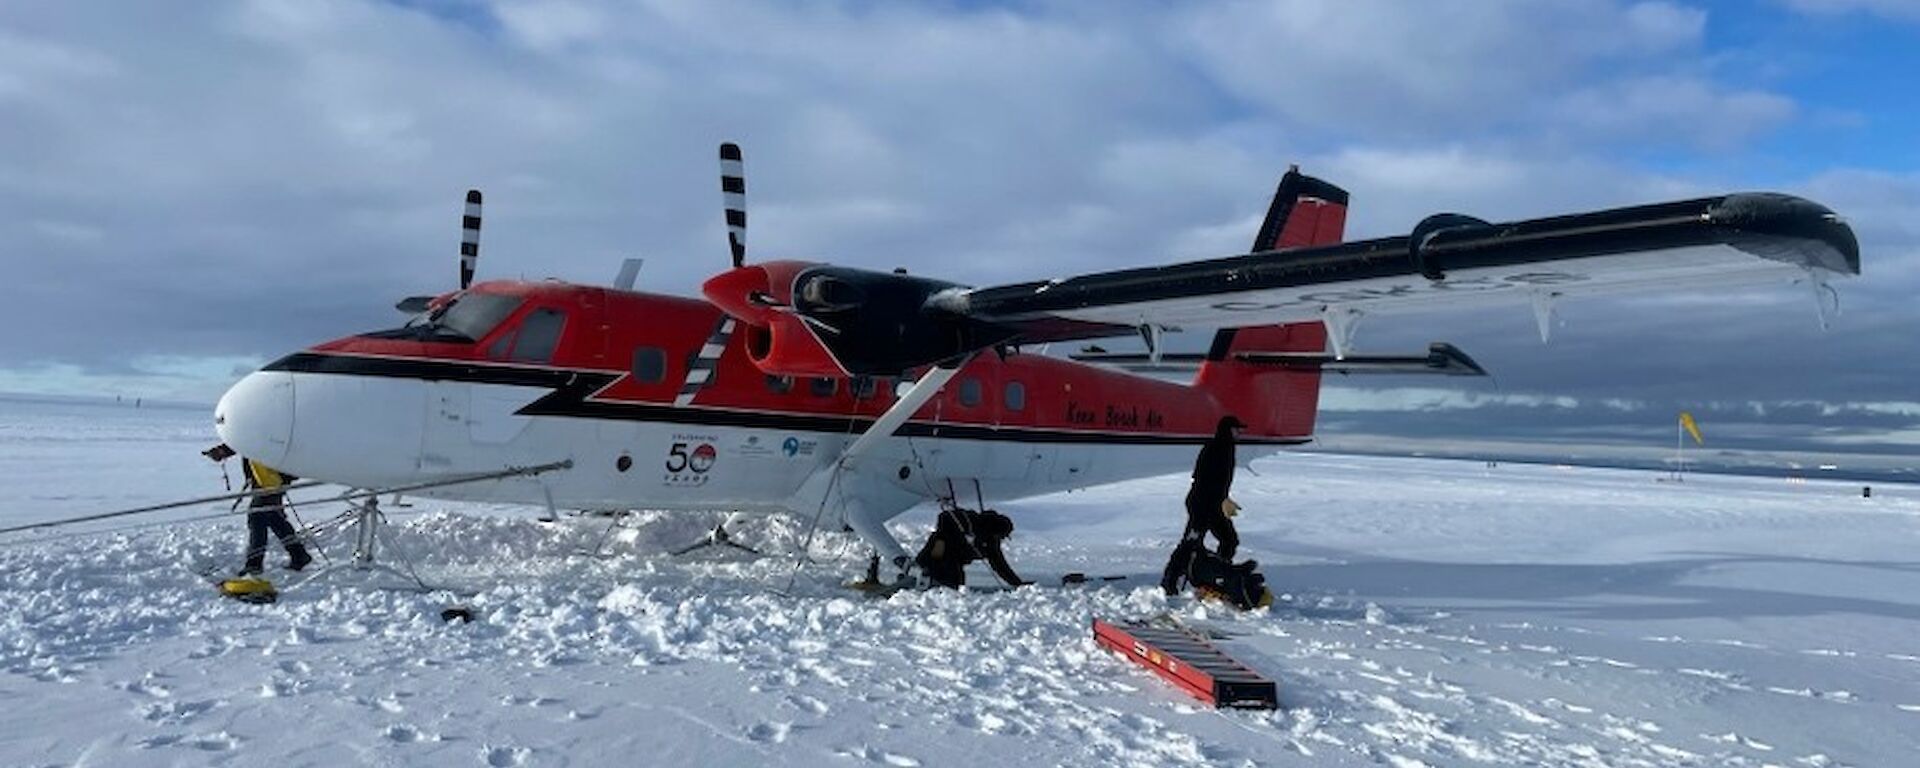 A red and white Twin Otter aircraft with skis parked on the ice.